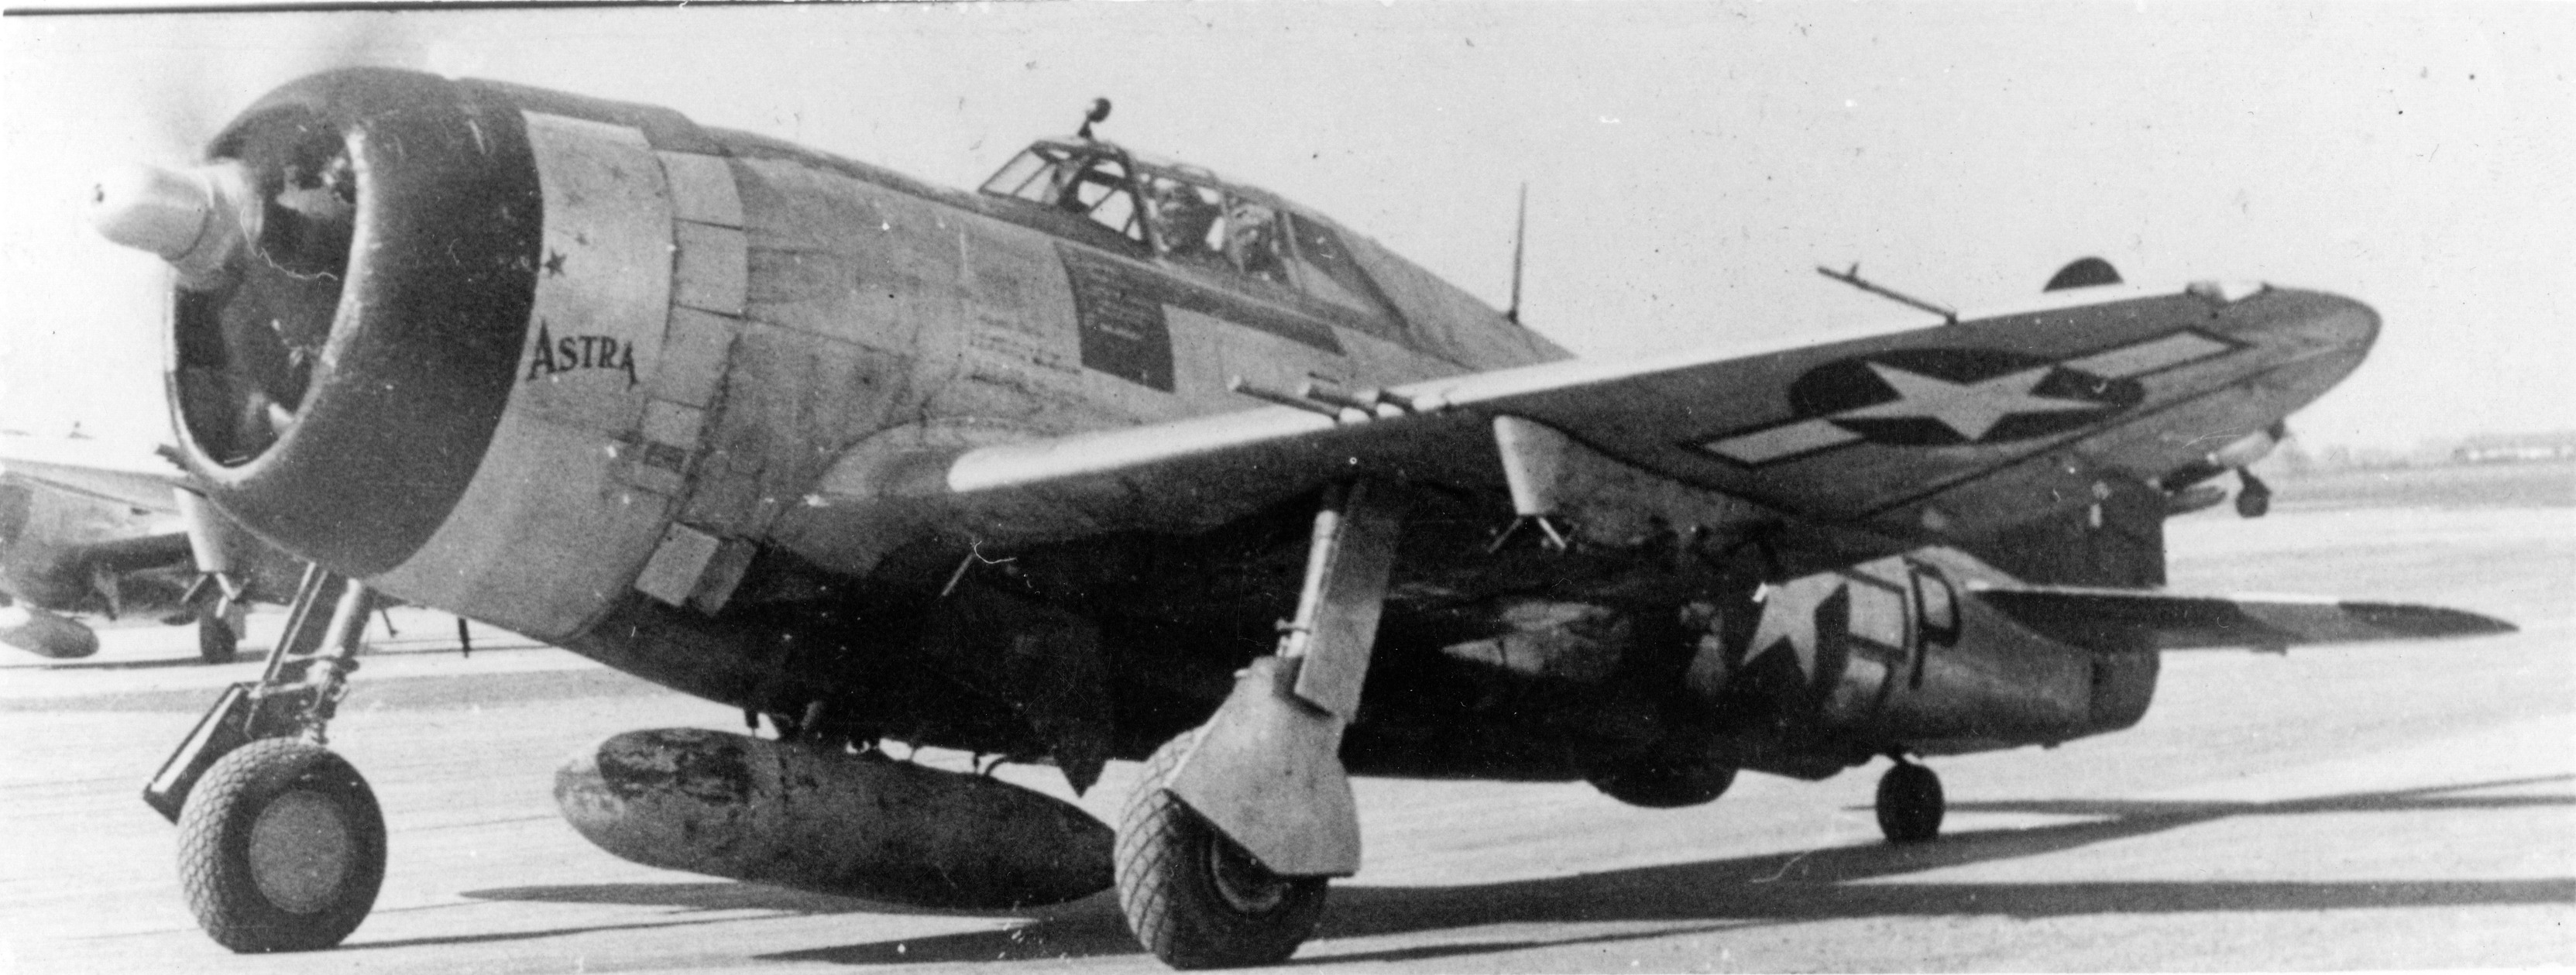 two-seat P-47 Thunderbolt nicknamed Astra 365th Fighter Group.jpg